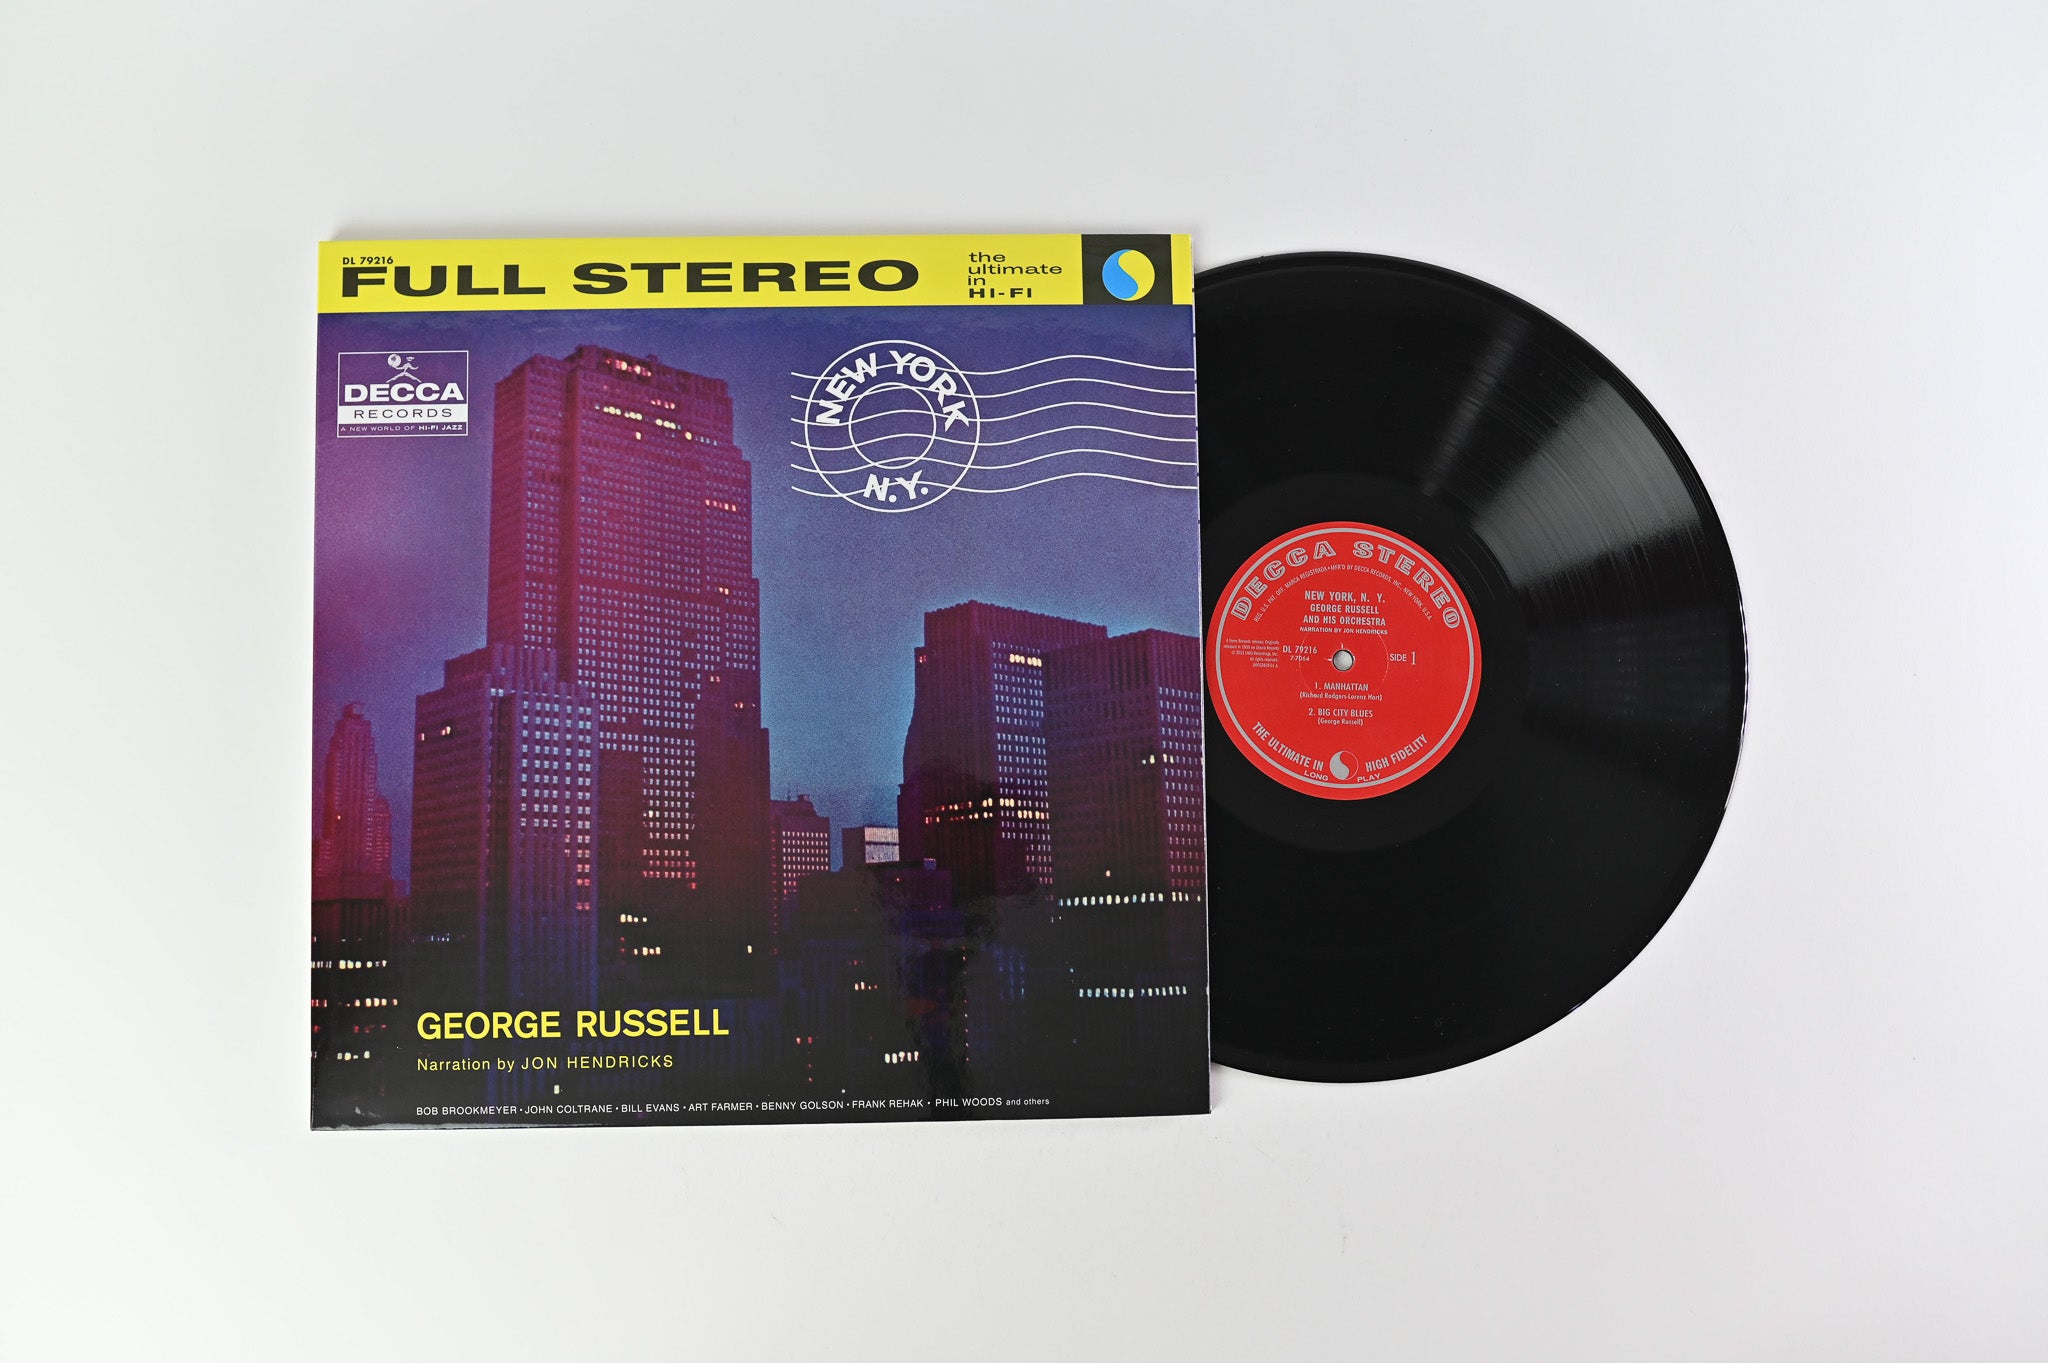 George Russell Orchestra - New York, N.Y. Reissue on Decca Acoustic Sounds Series